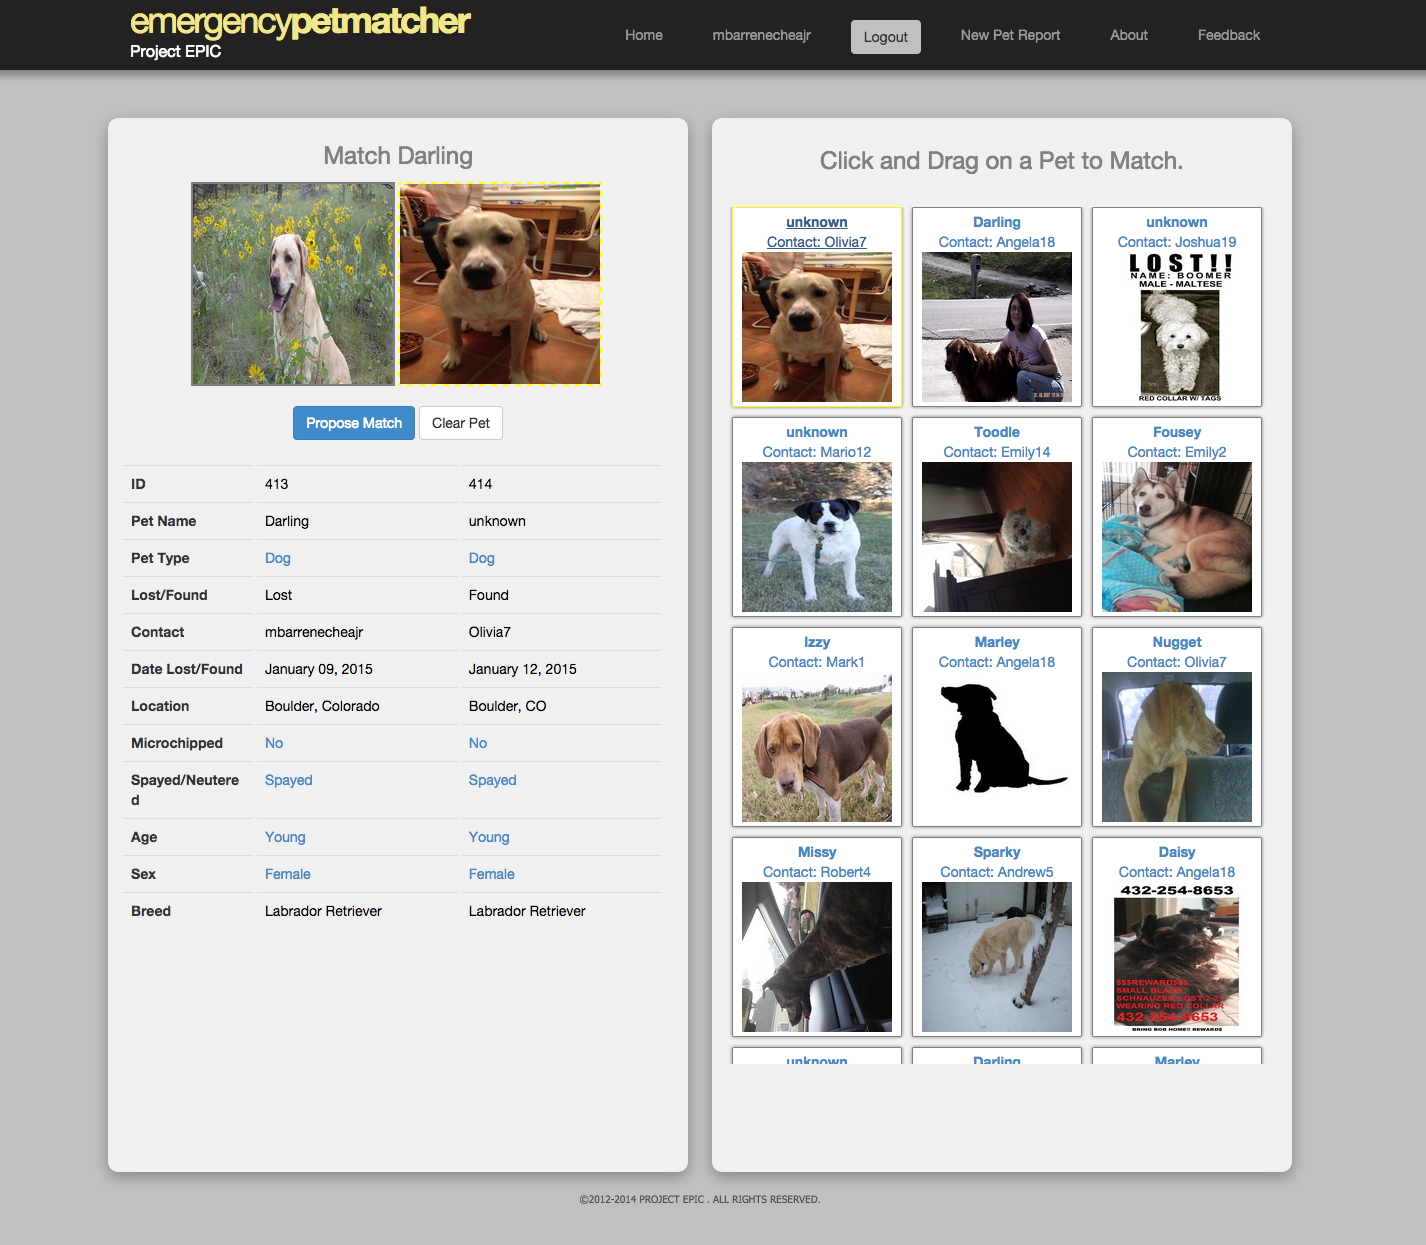 PHOTO: EmergencyPetMatcher users can help match photos of lost pets to photos of found pets using an up-vote and down-vote system.